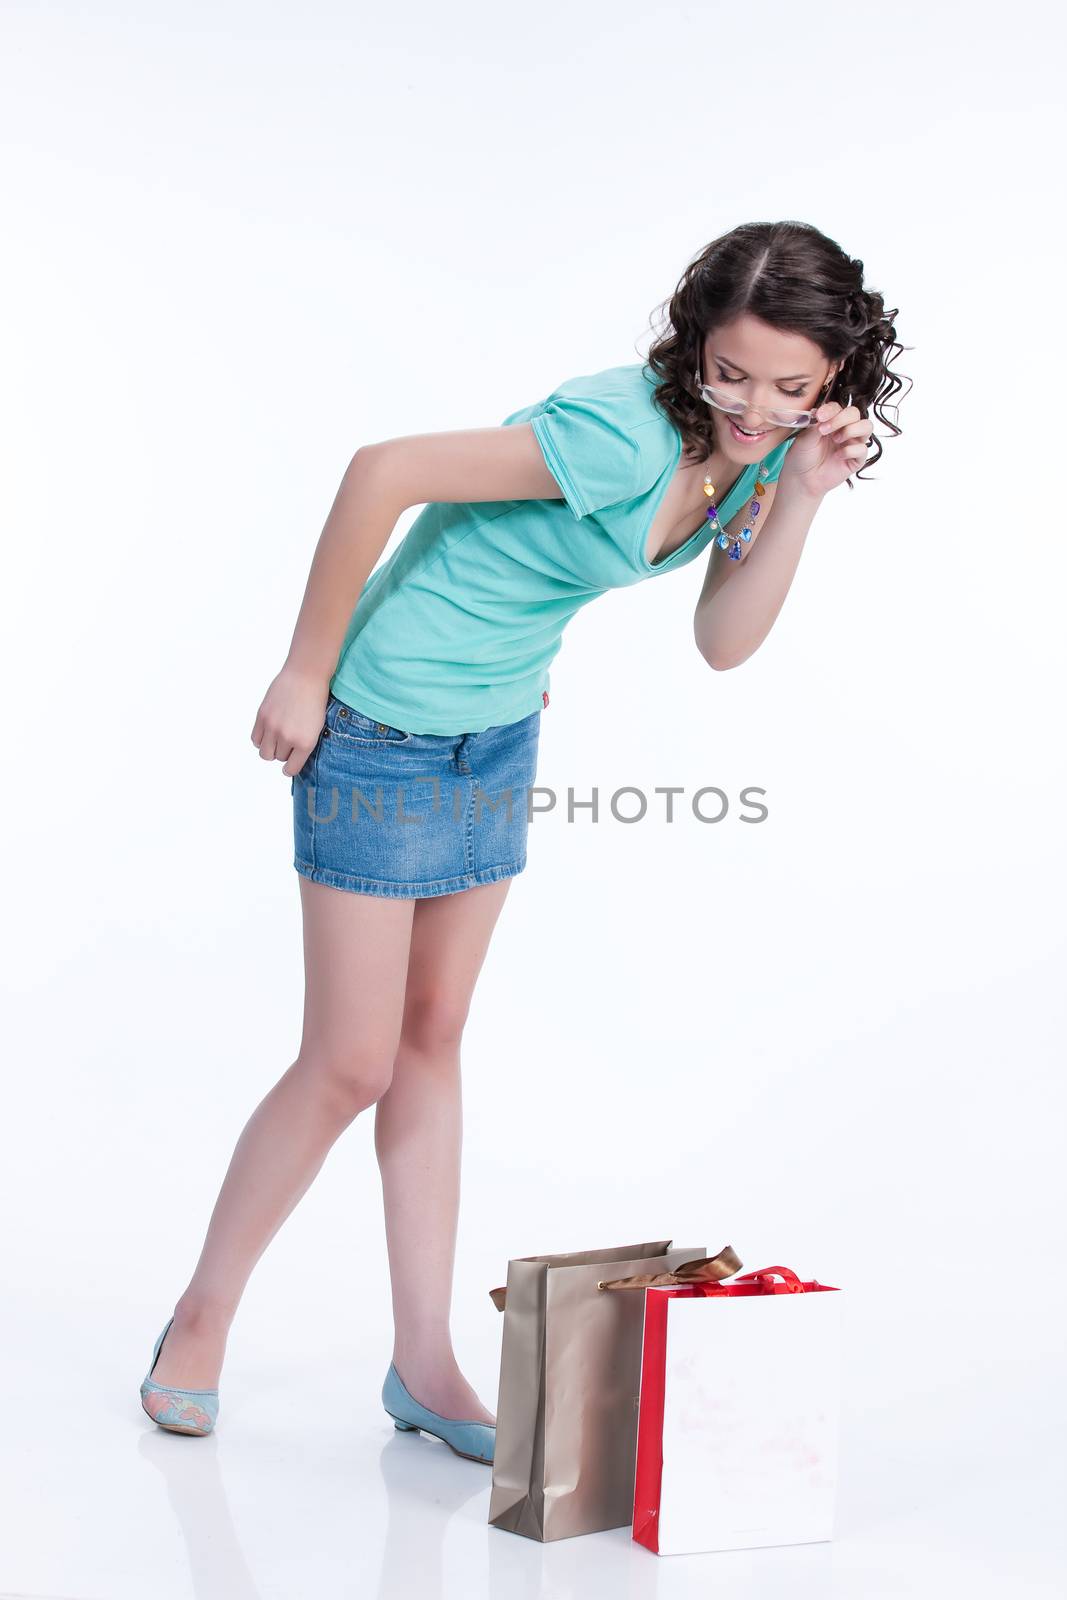 Young woman with shopping bag in different actions and emotions